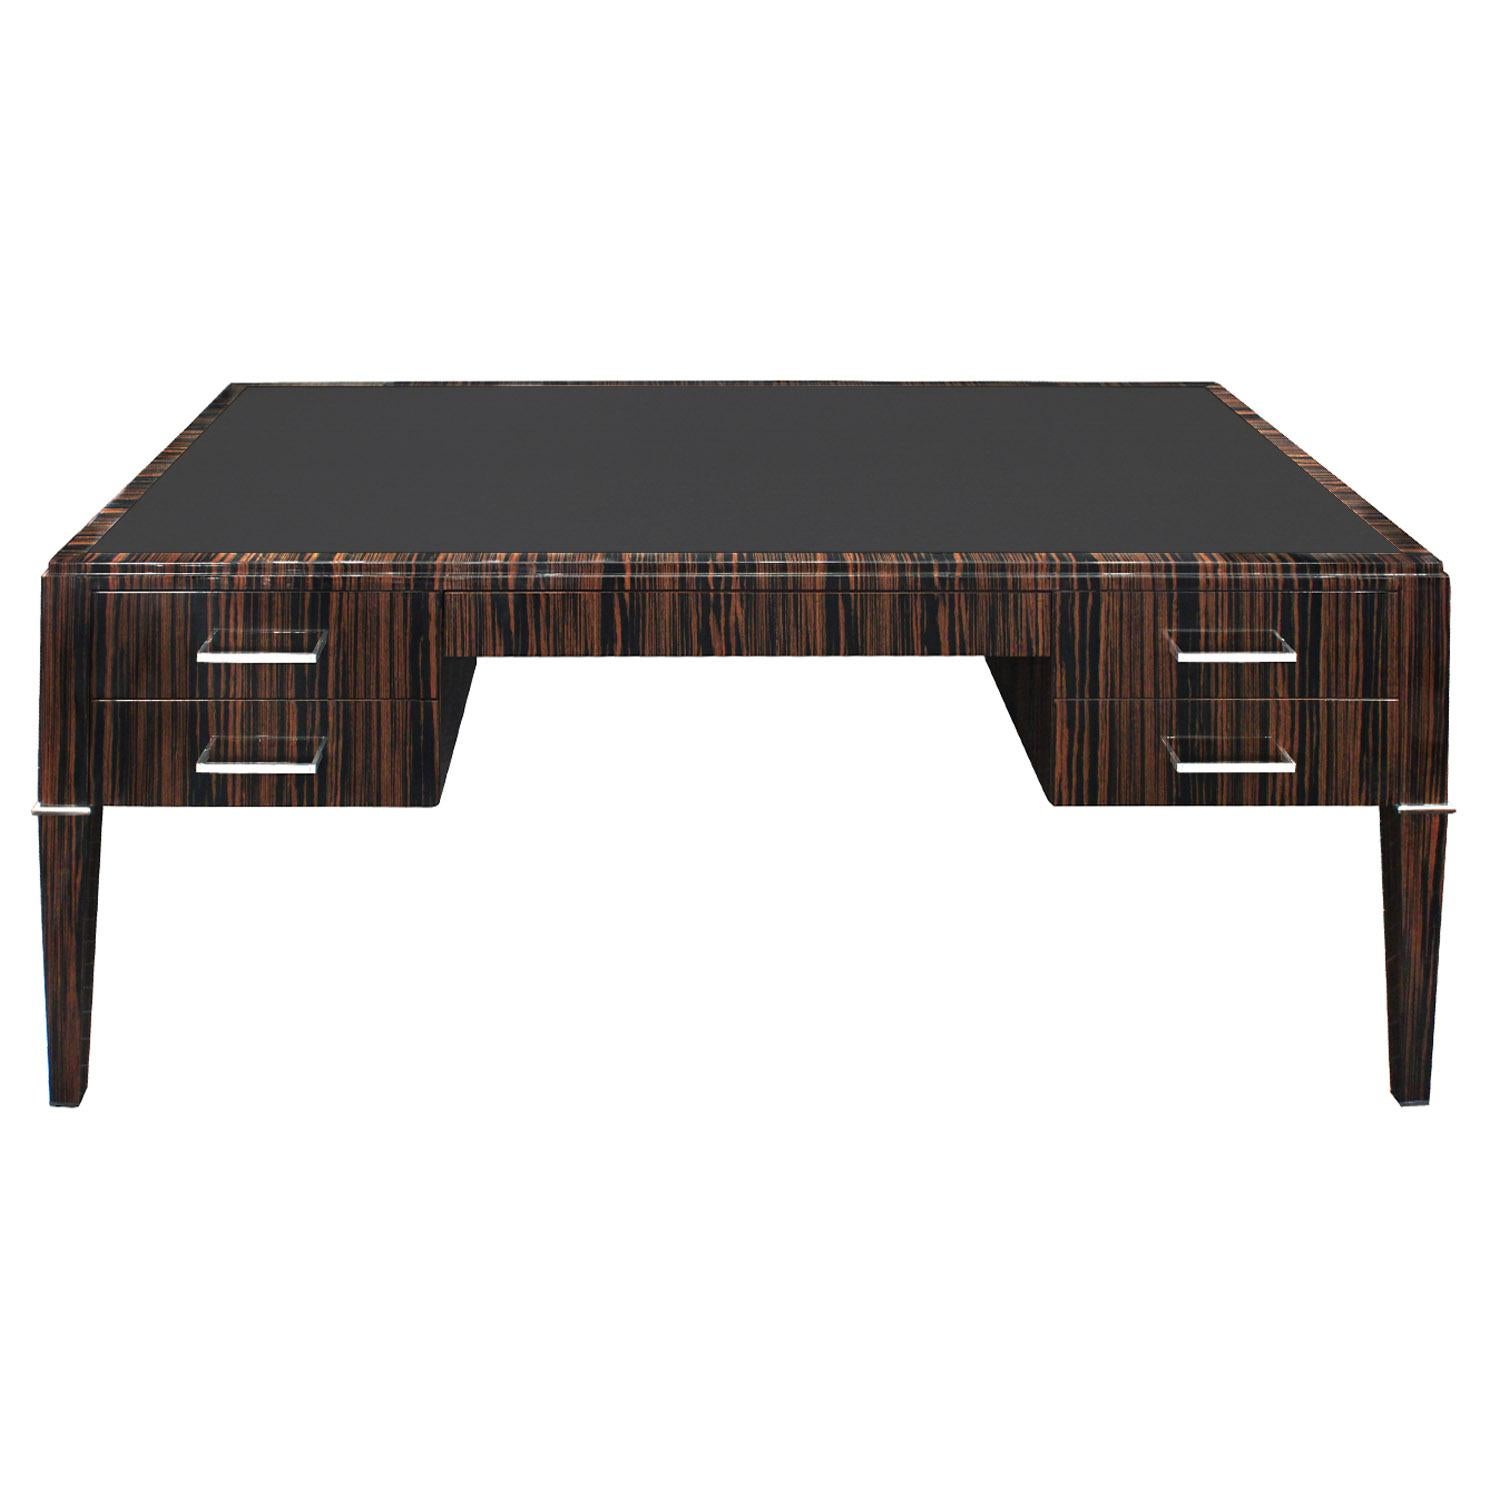 Desk in mirror polished Macassar ebony with handcrafted stainless steel pulls and accents and inset leather top by Evan Lobel for Lobel Originals. This can be made to any size and configuration. We customize each one to spec. Lead time 12-14 weeks.